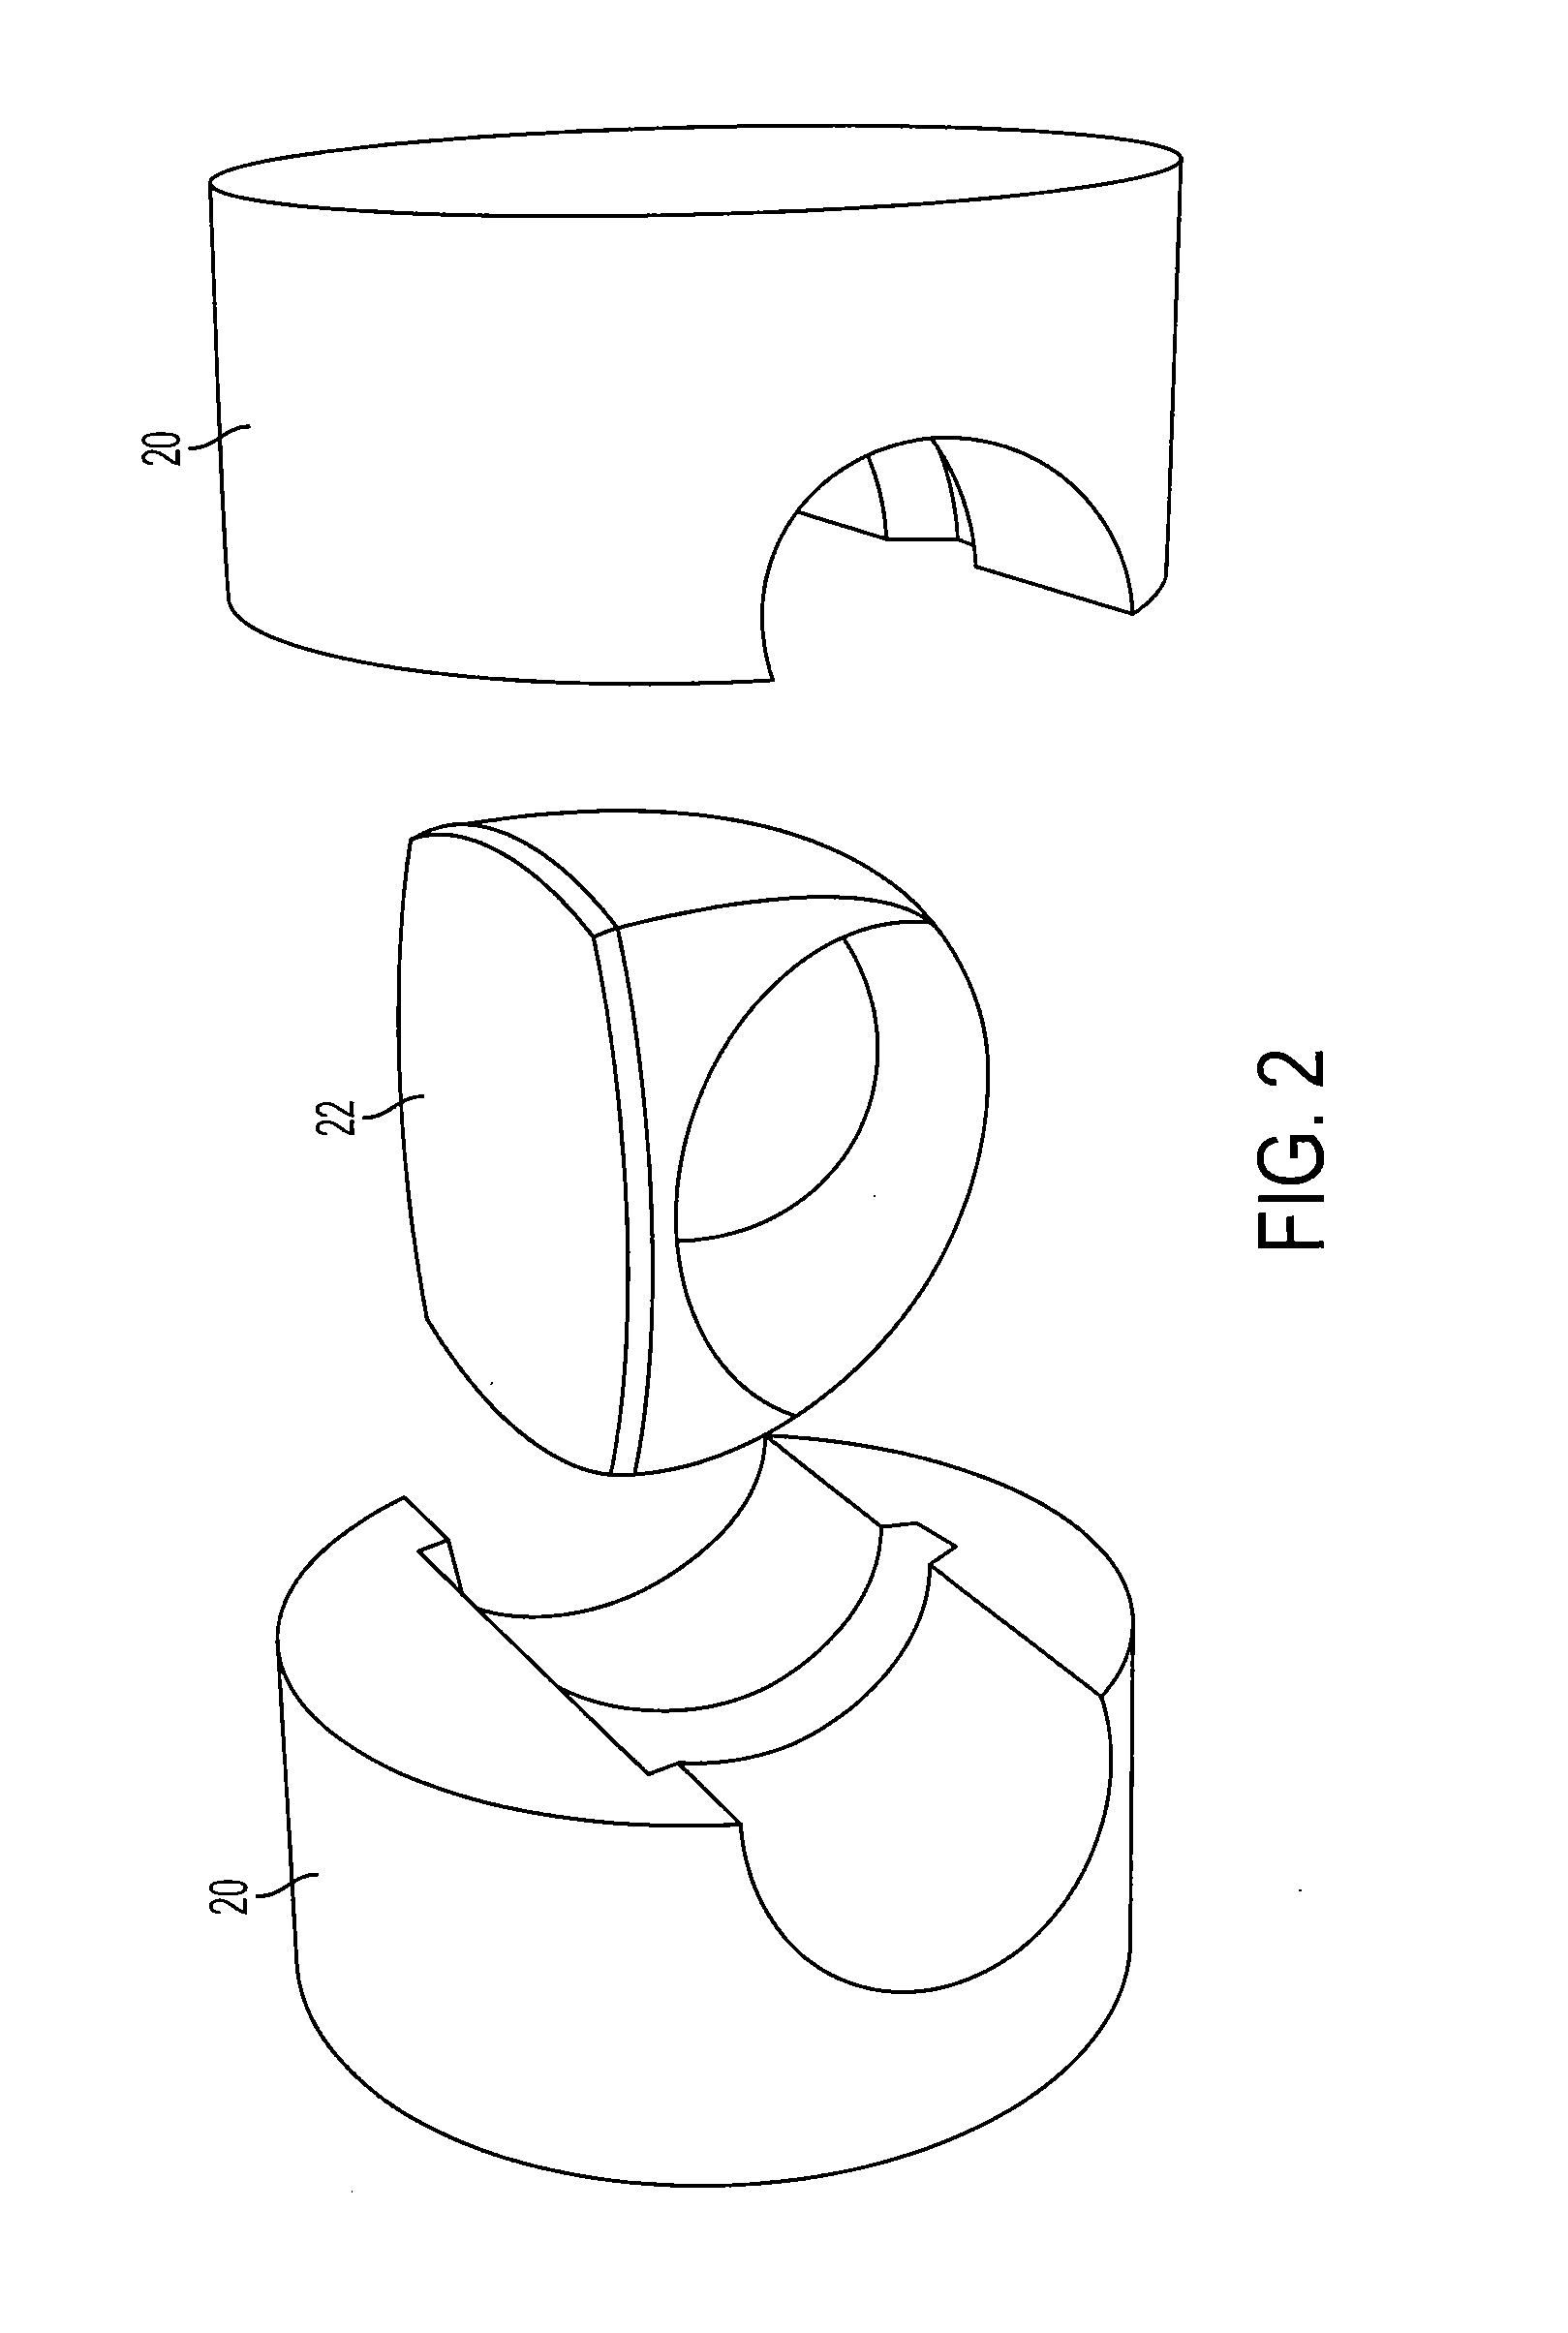 Method for digital manufacturing of jewelry items